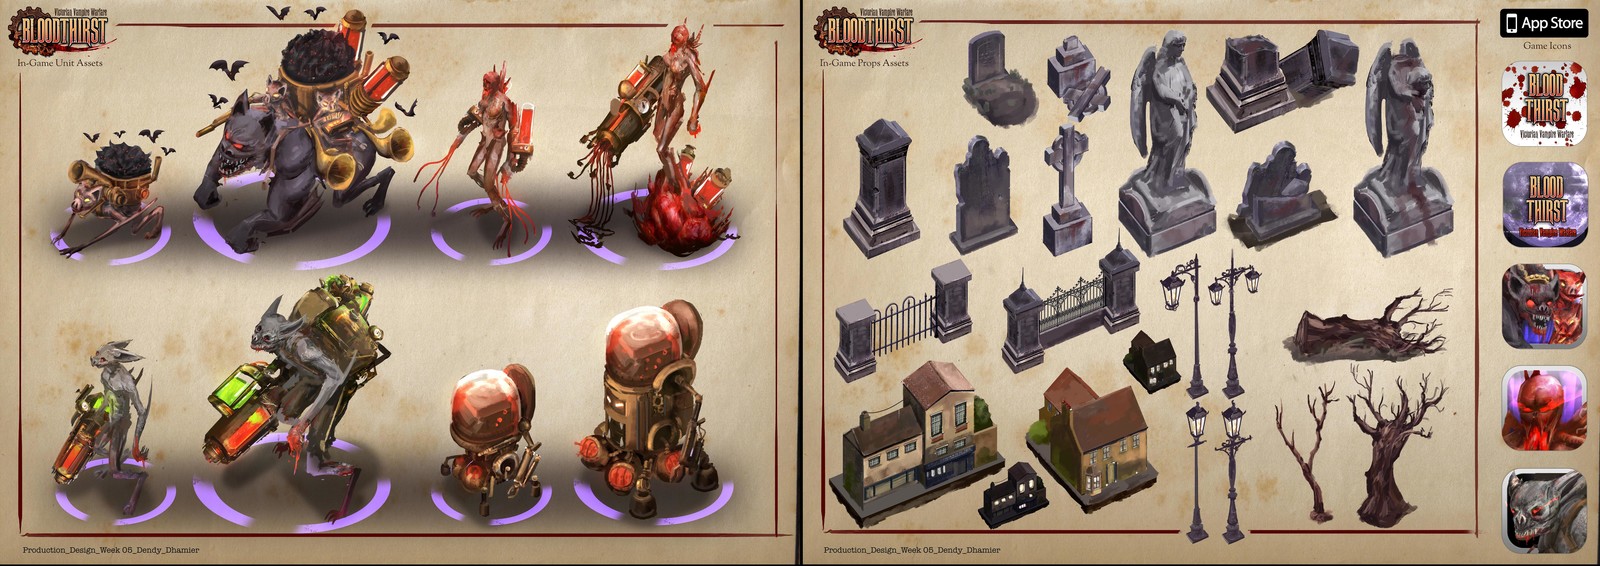 In-Game assets, props and icon design.